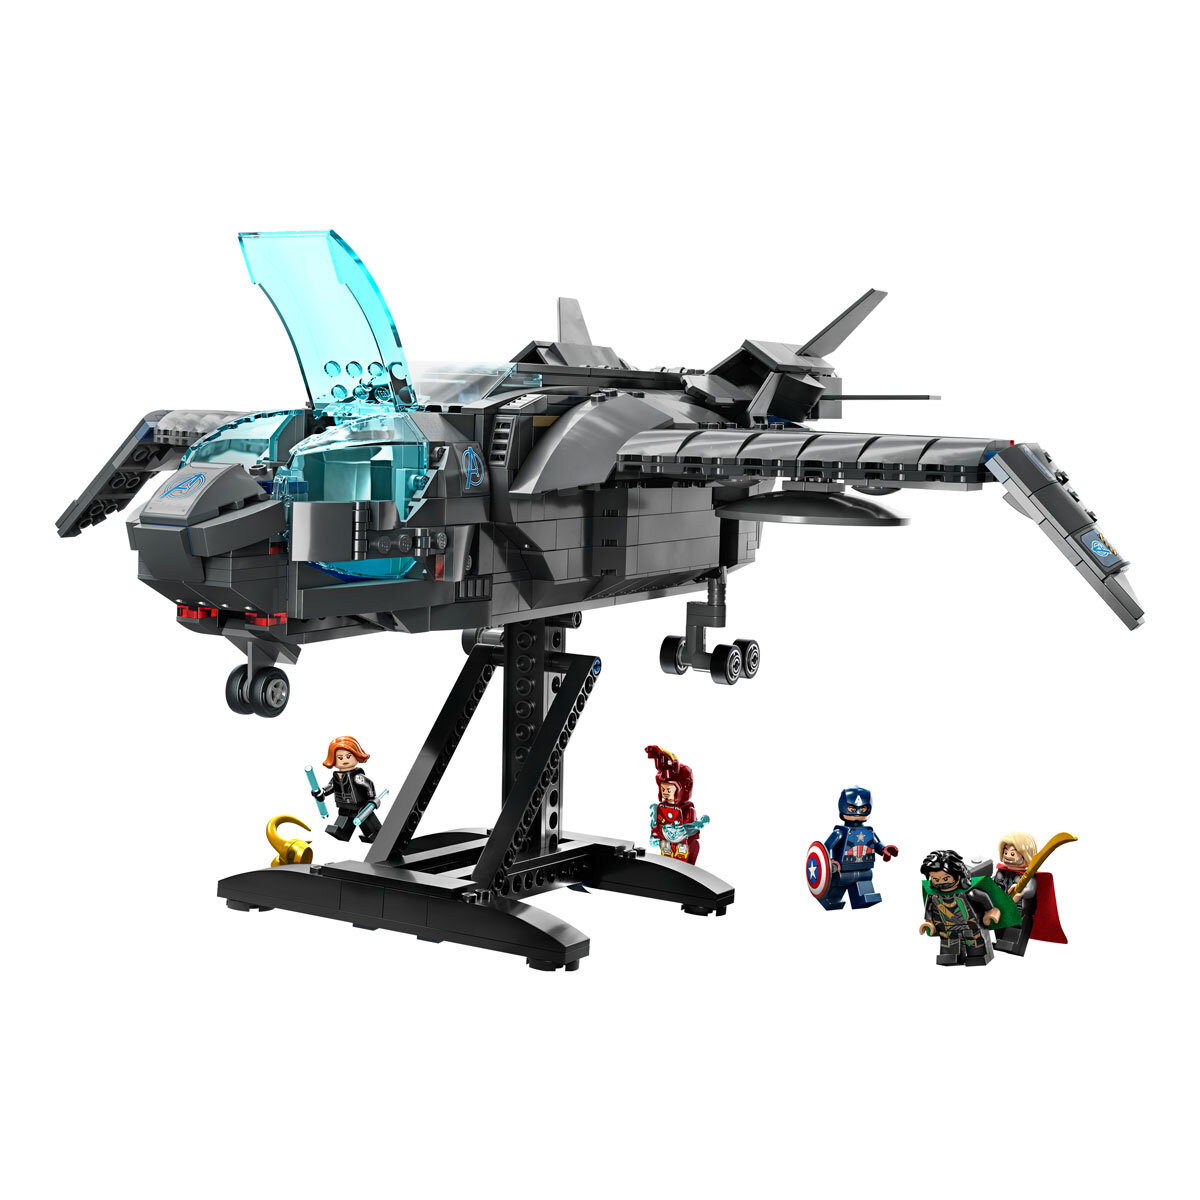 Buy LEGO The Avengers Quinjet Overview2 Image at Costco.co.uk